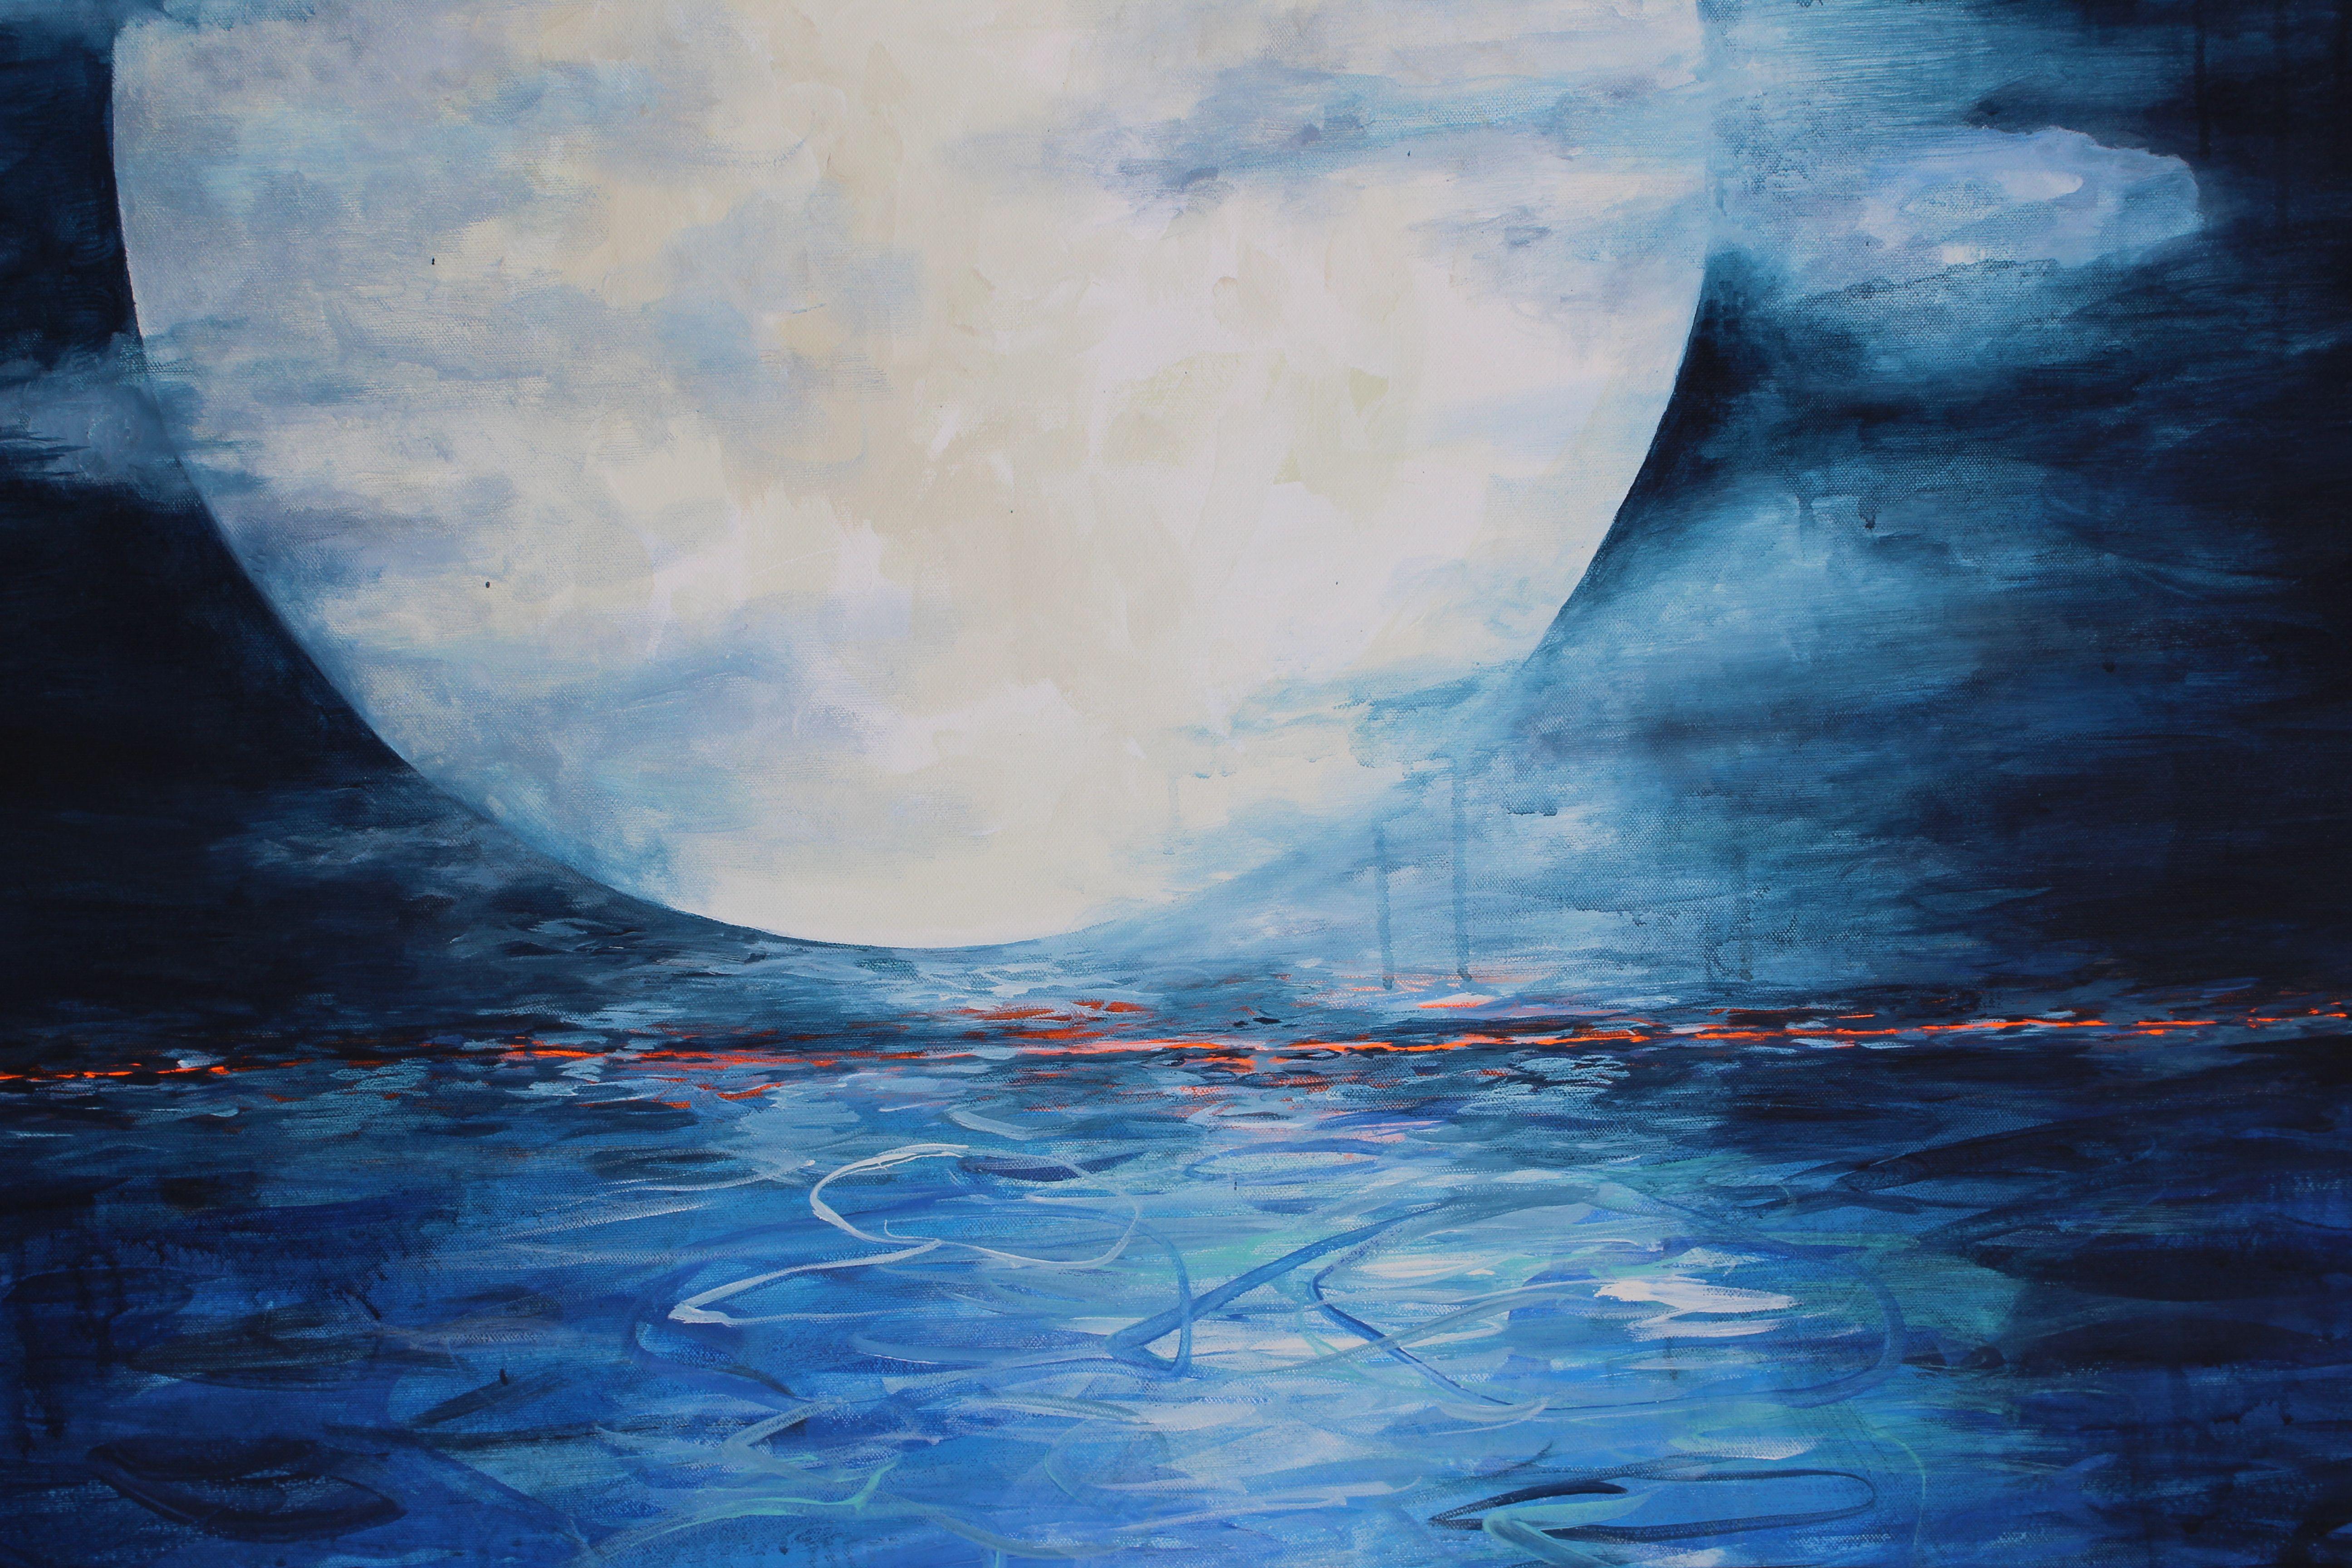 Night Moon - Is from a series of Moons that I was working on with my water series. I'm in awe of a full moon over the ocean and the serene effect it has on one's being. These are very soothing and comforting paintings to me and take me back to that